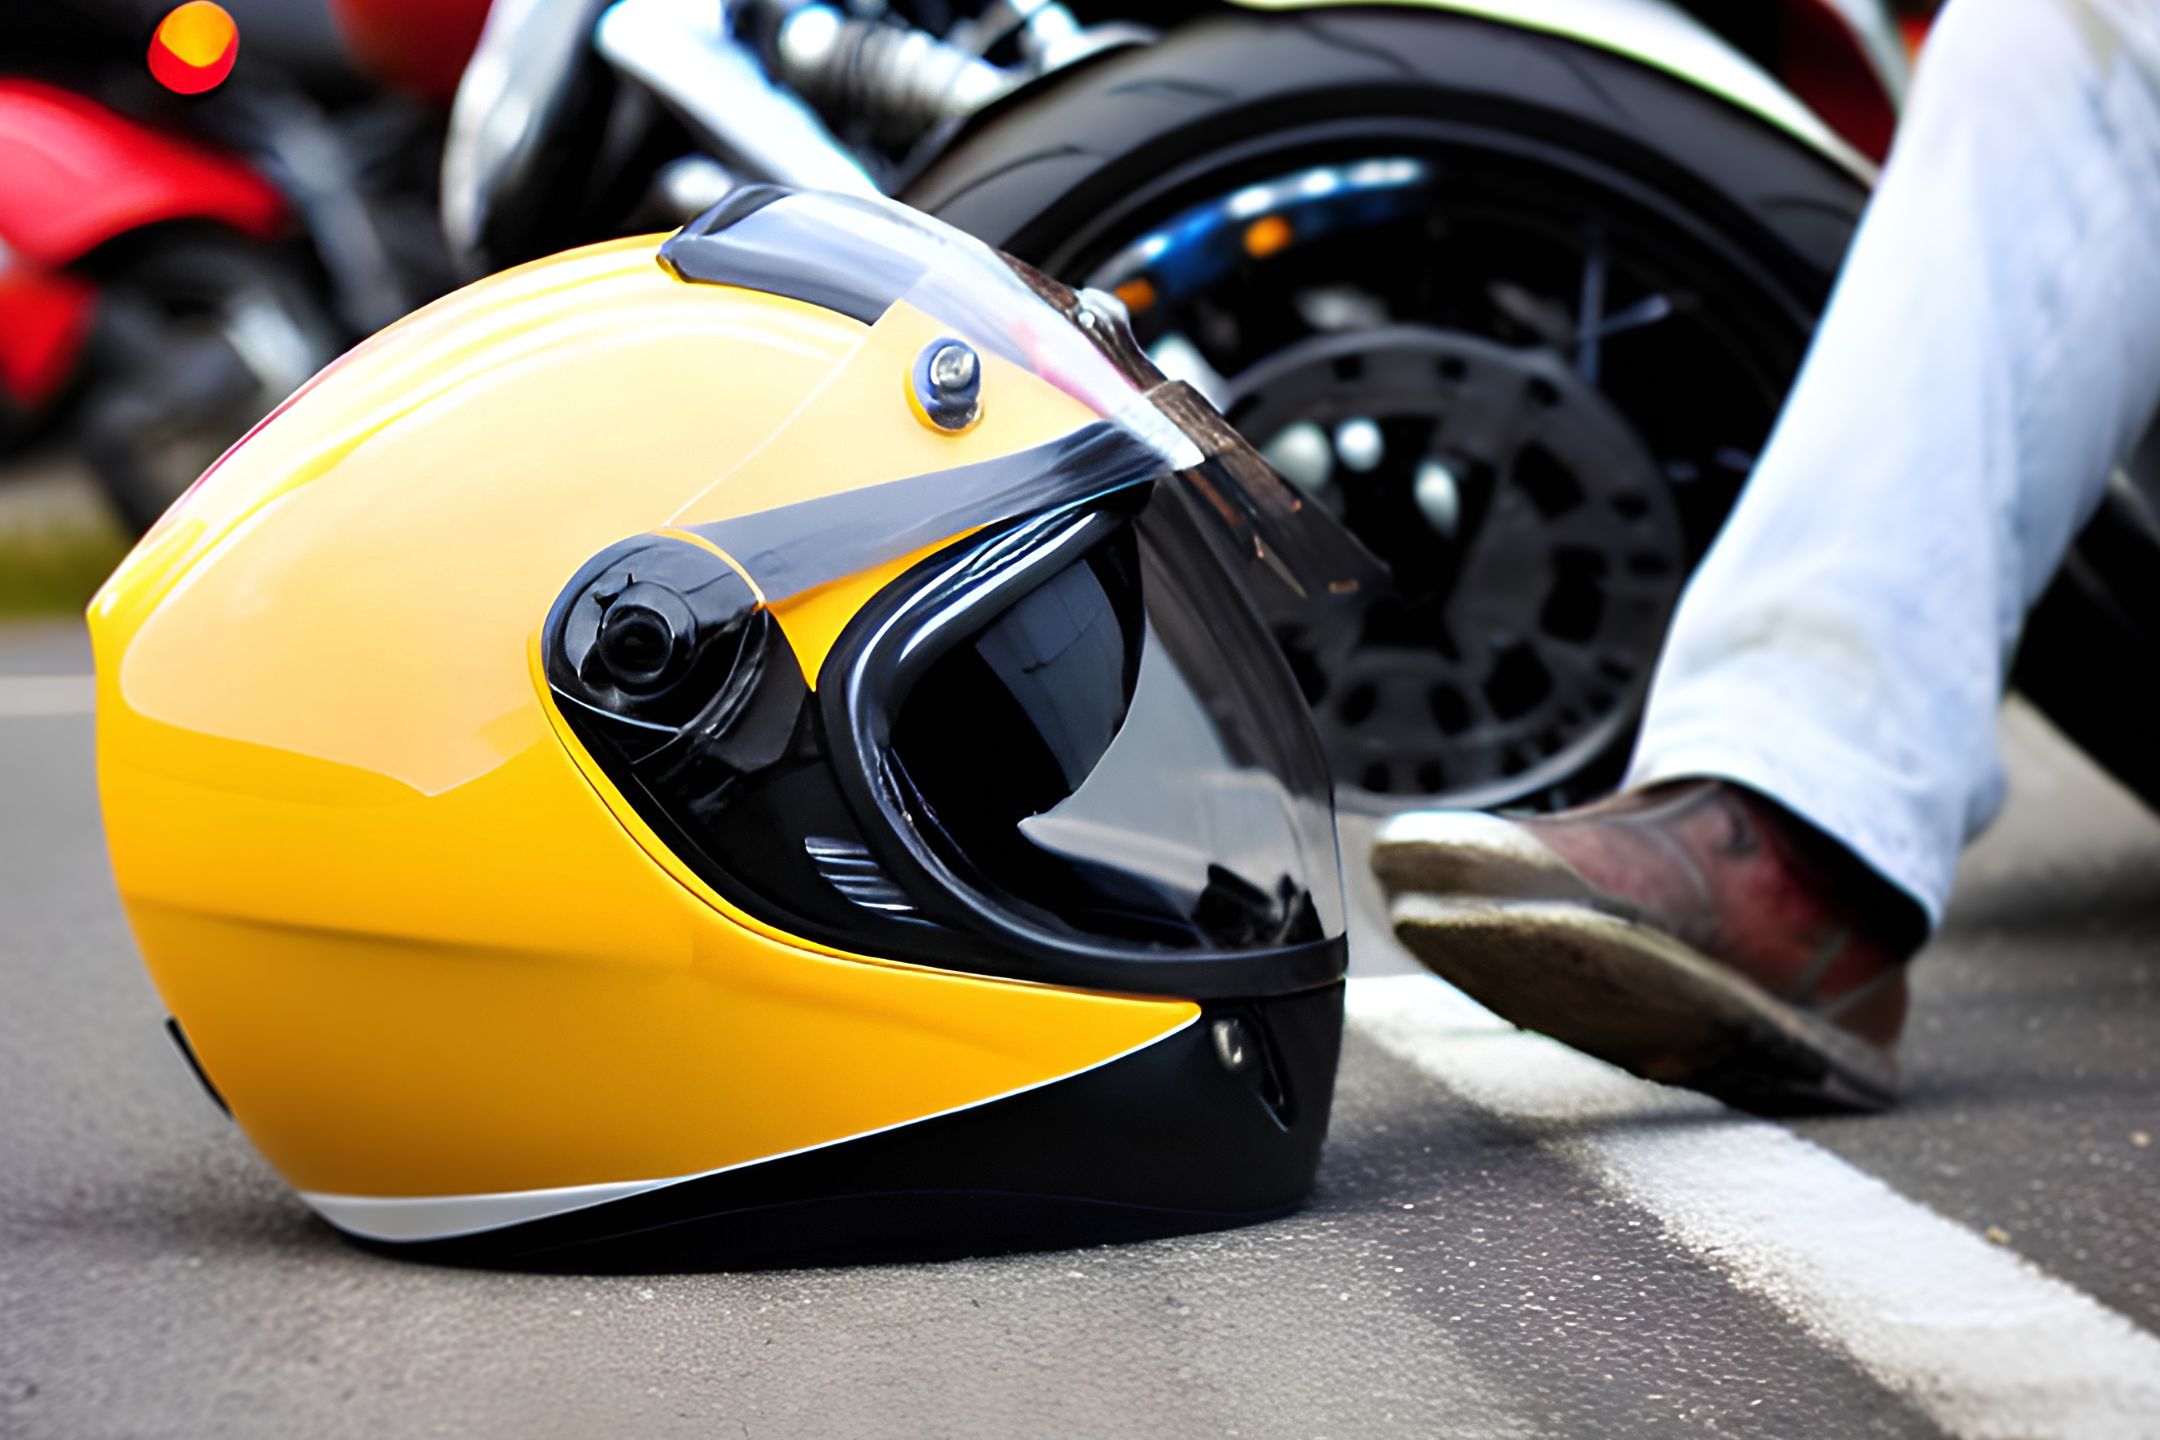 Common Causes of Motorcycle Wrecks